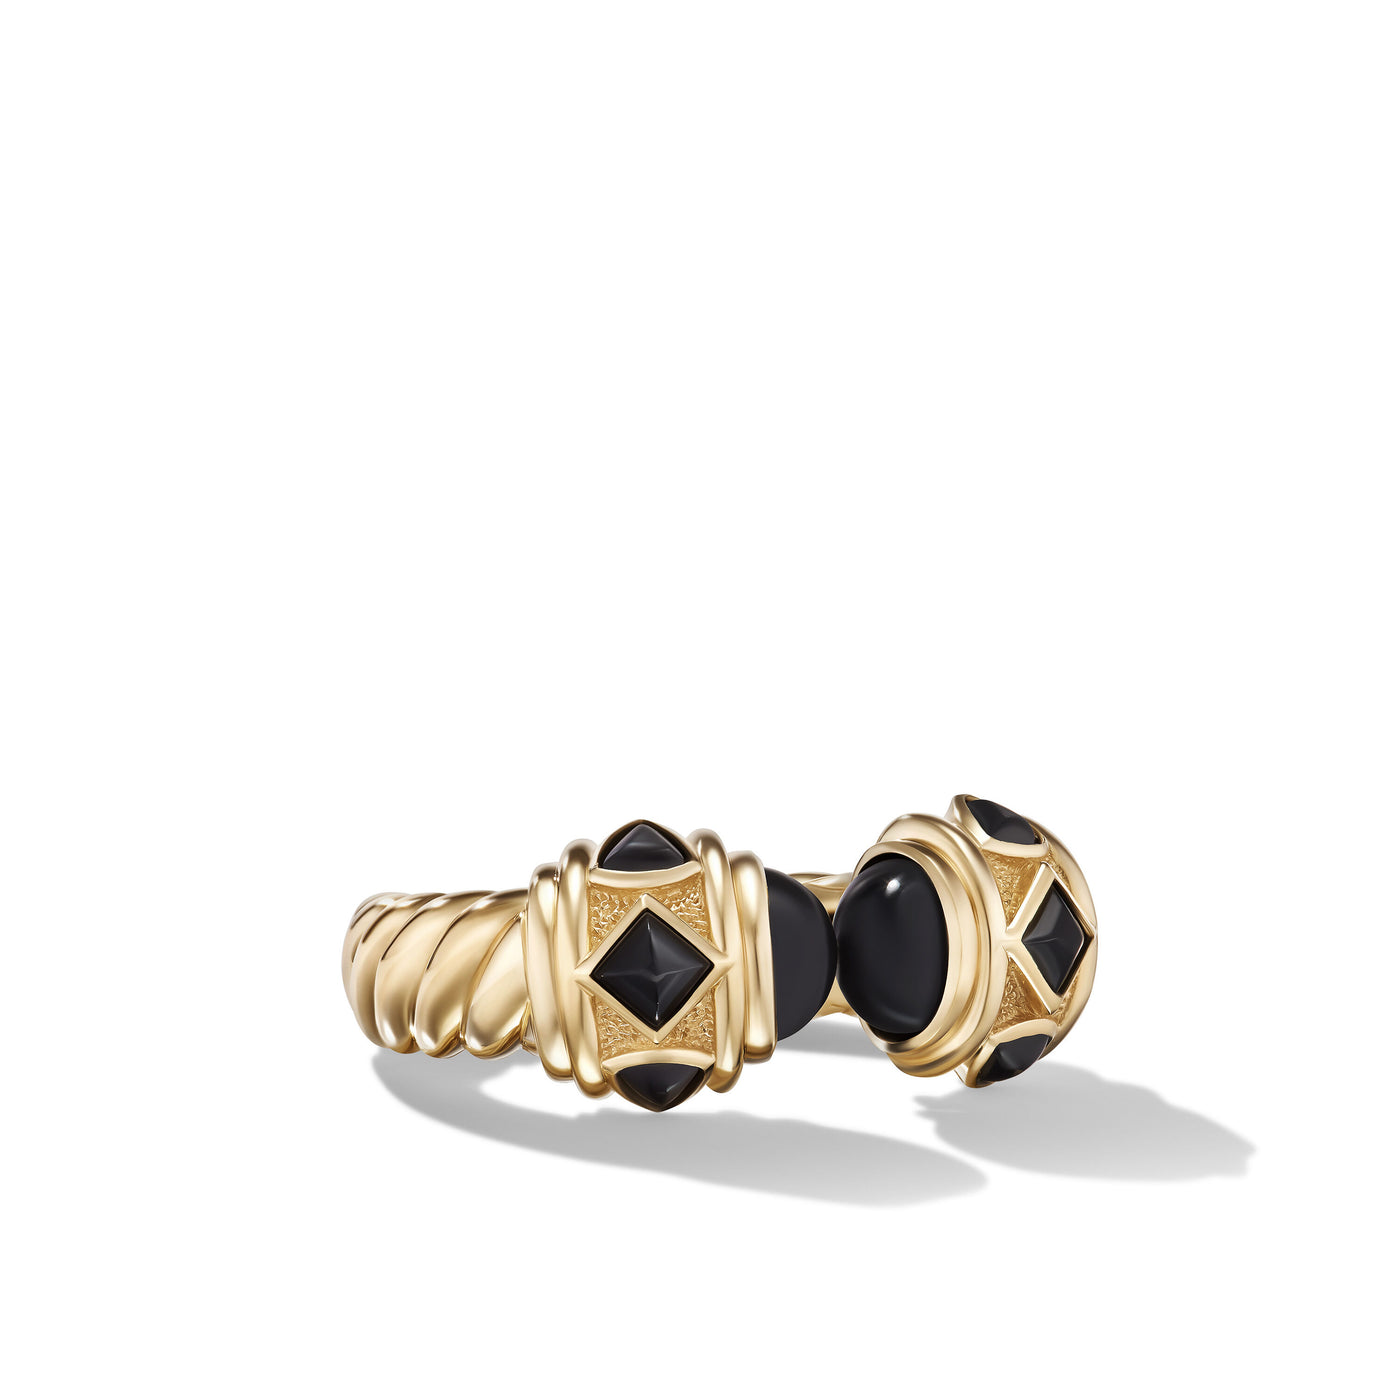 Renaissance® Ring in 18K Yellow Gold with Black Onyx\, 6.5mm